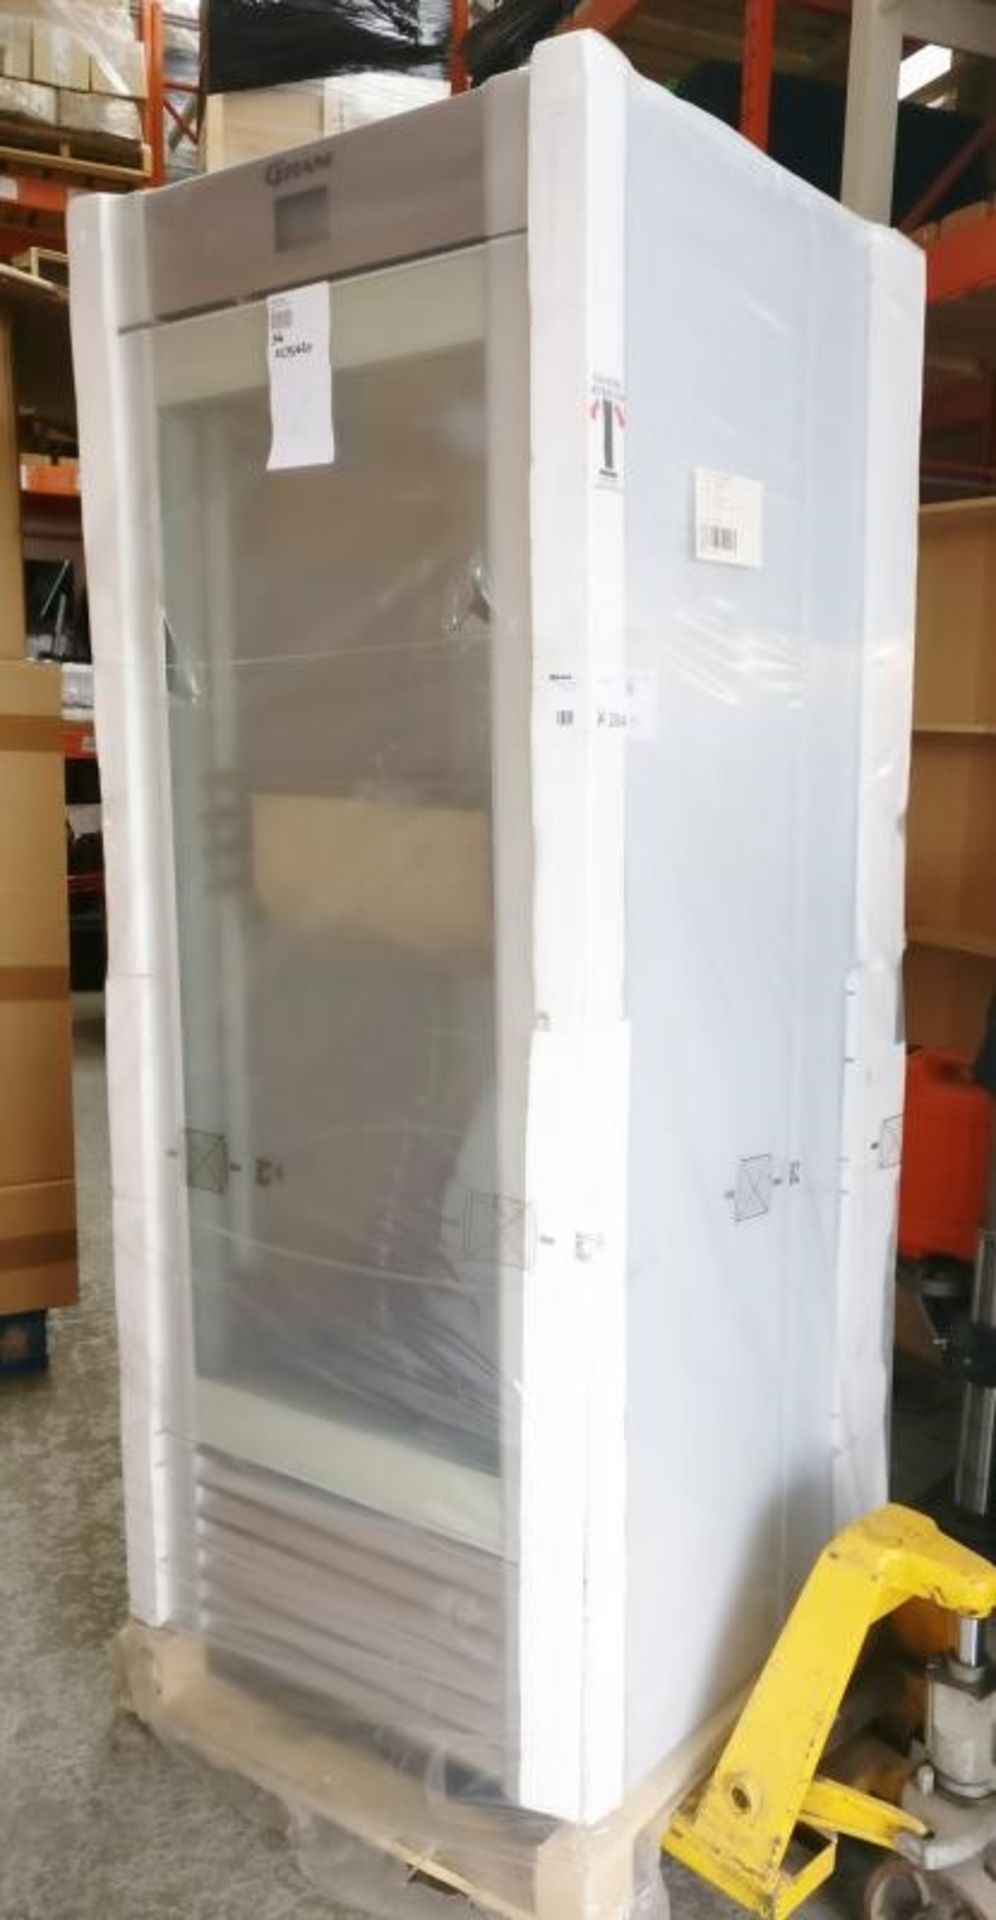 1 x Gram Marine Midi Upright Commercial Freezer With Glass Door - 2/1 GN Wide -  Model FG82CCH4M - C - Image 2 of 2